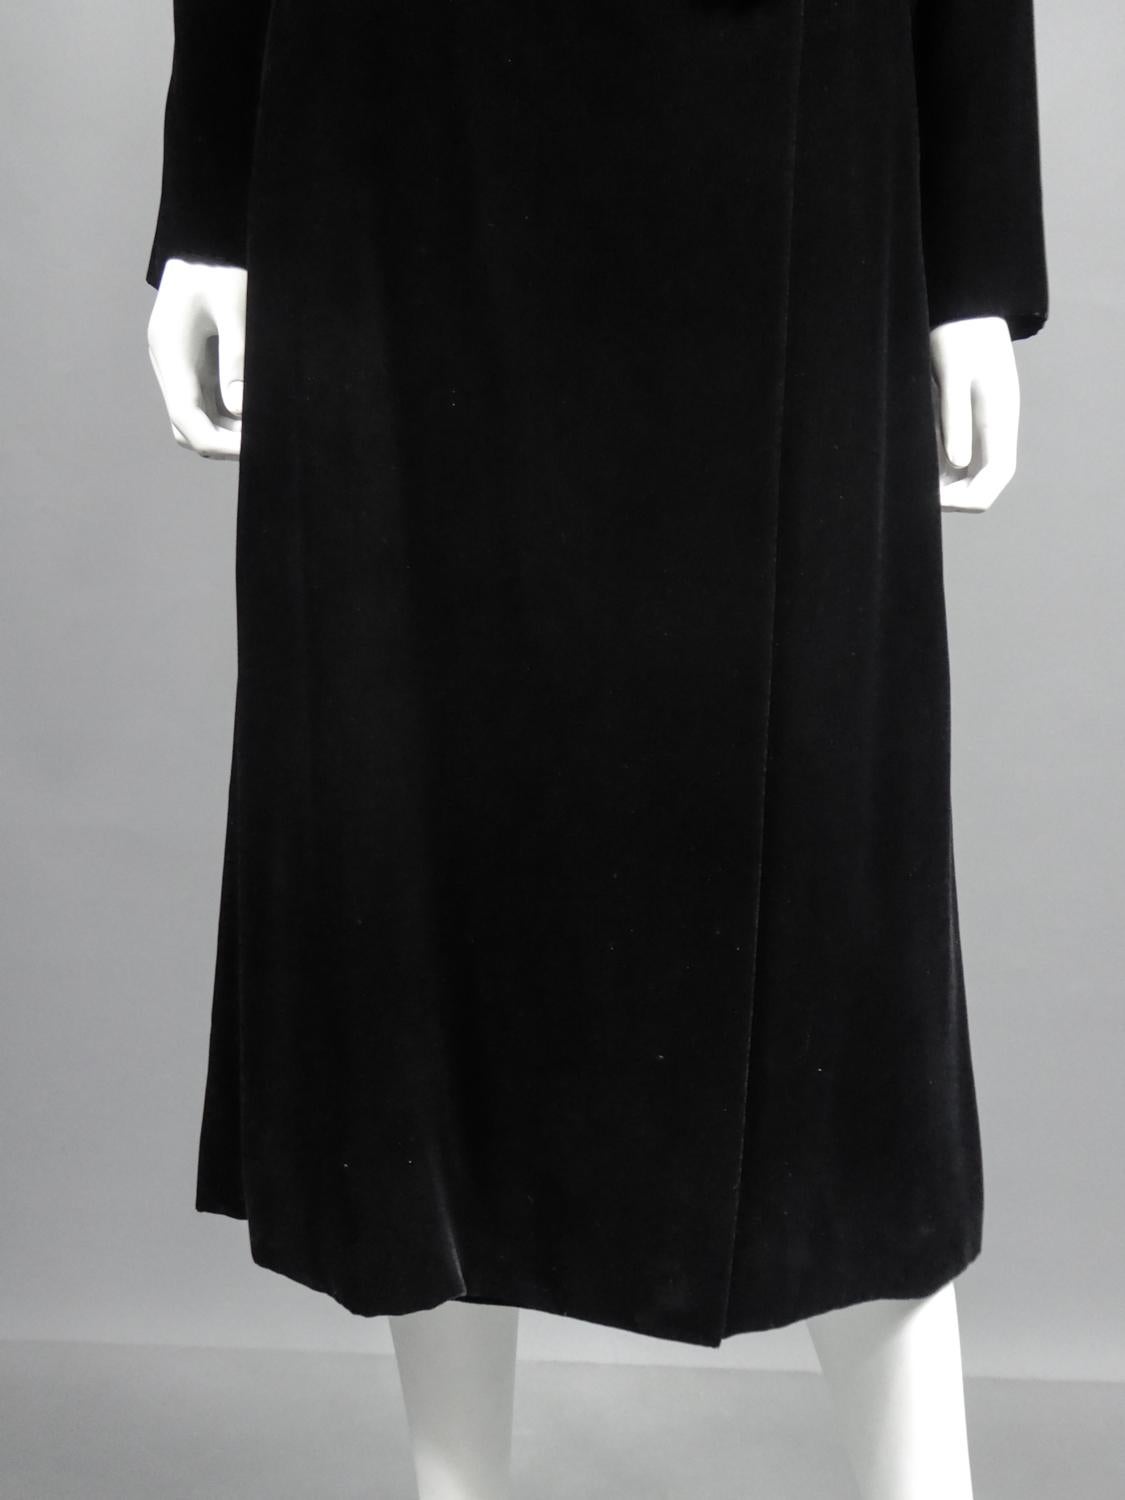 A french Couture Emanuel Ungaro Little Black Dress Number 4383-10-76 Circa 1976 For Sale 5